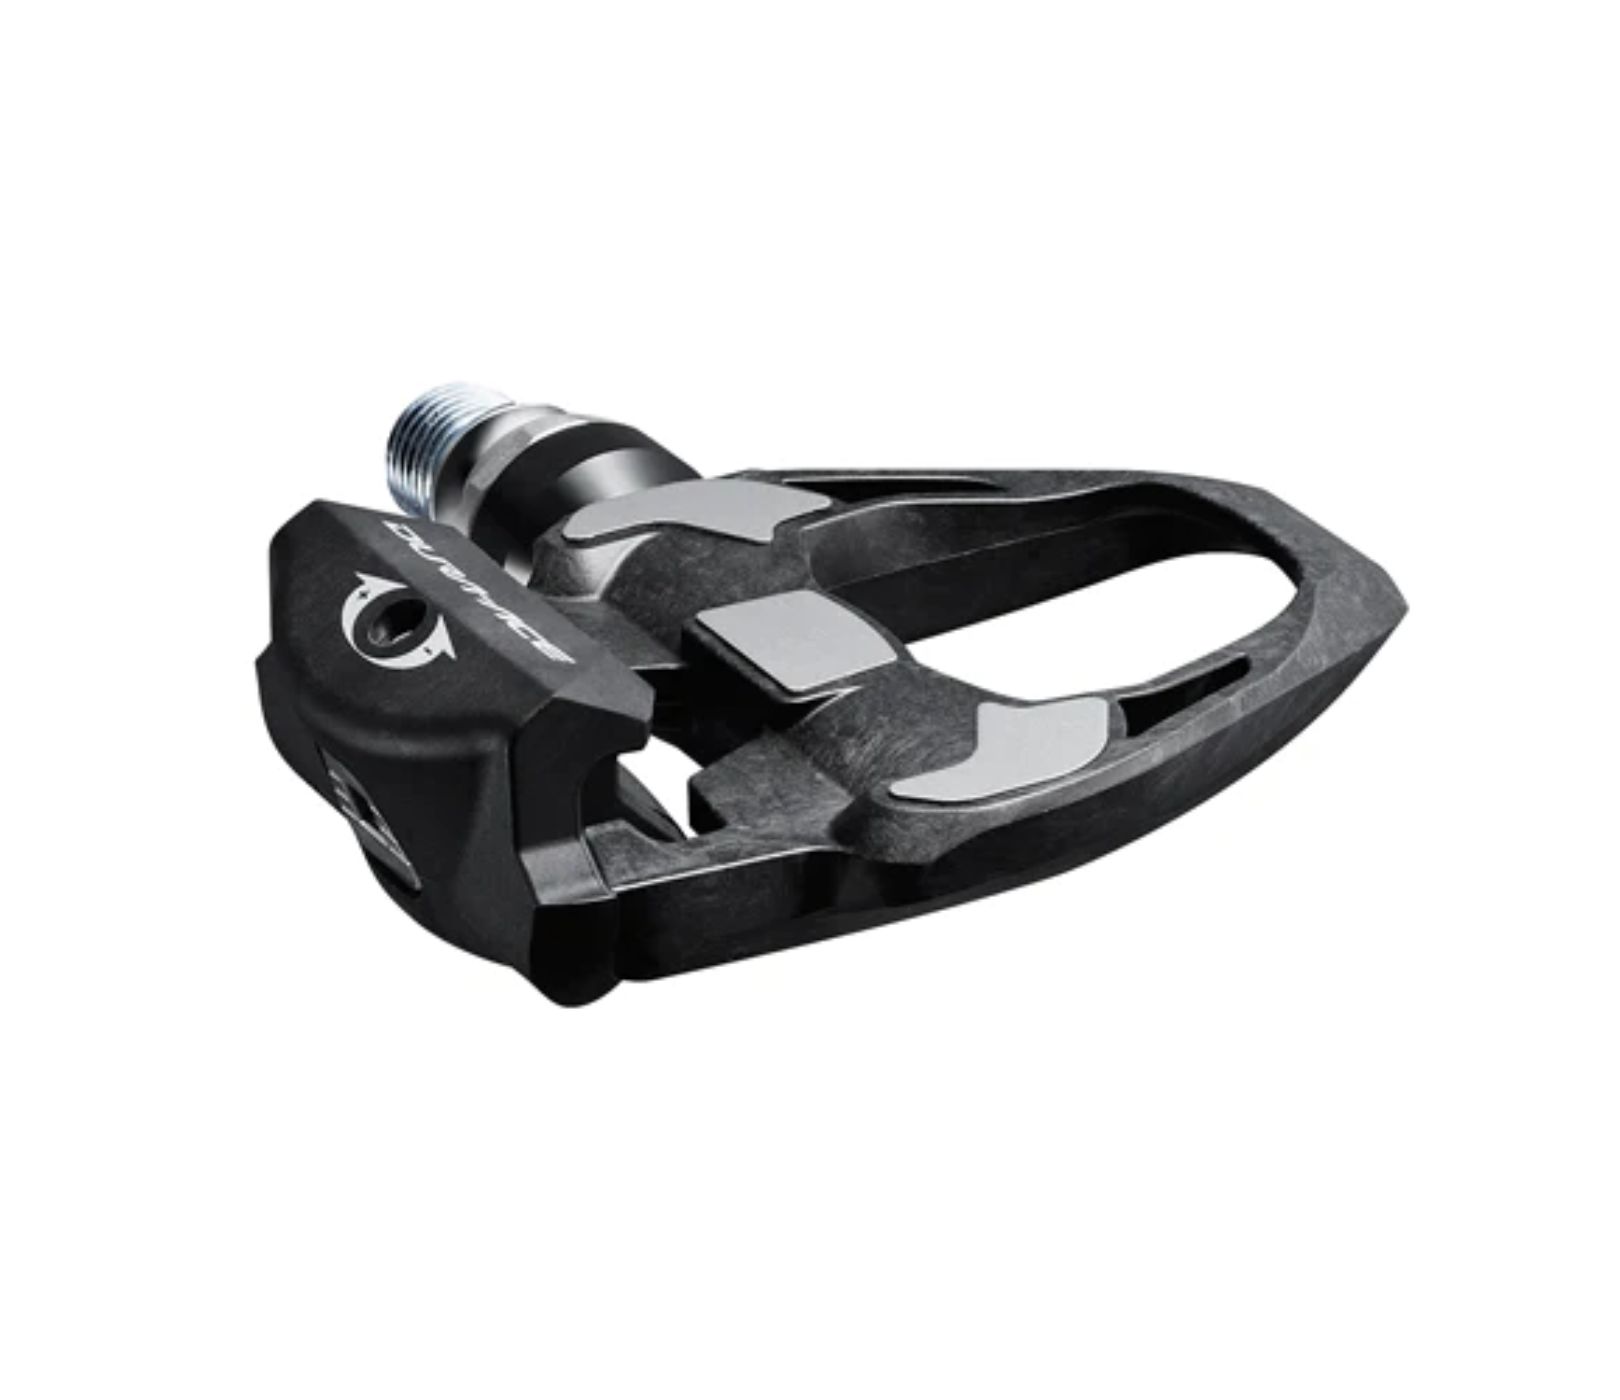 Shimano Dura-Ace PD-R9100 Road Pedals